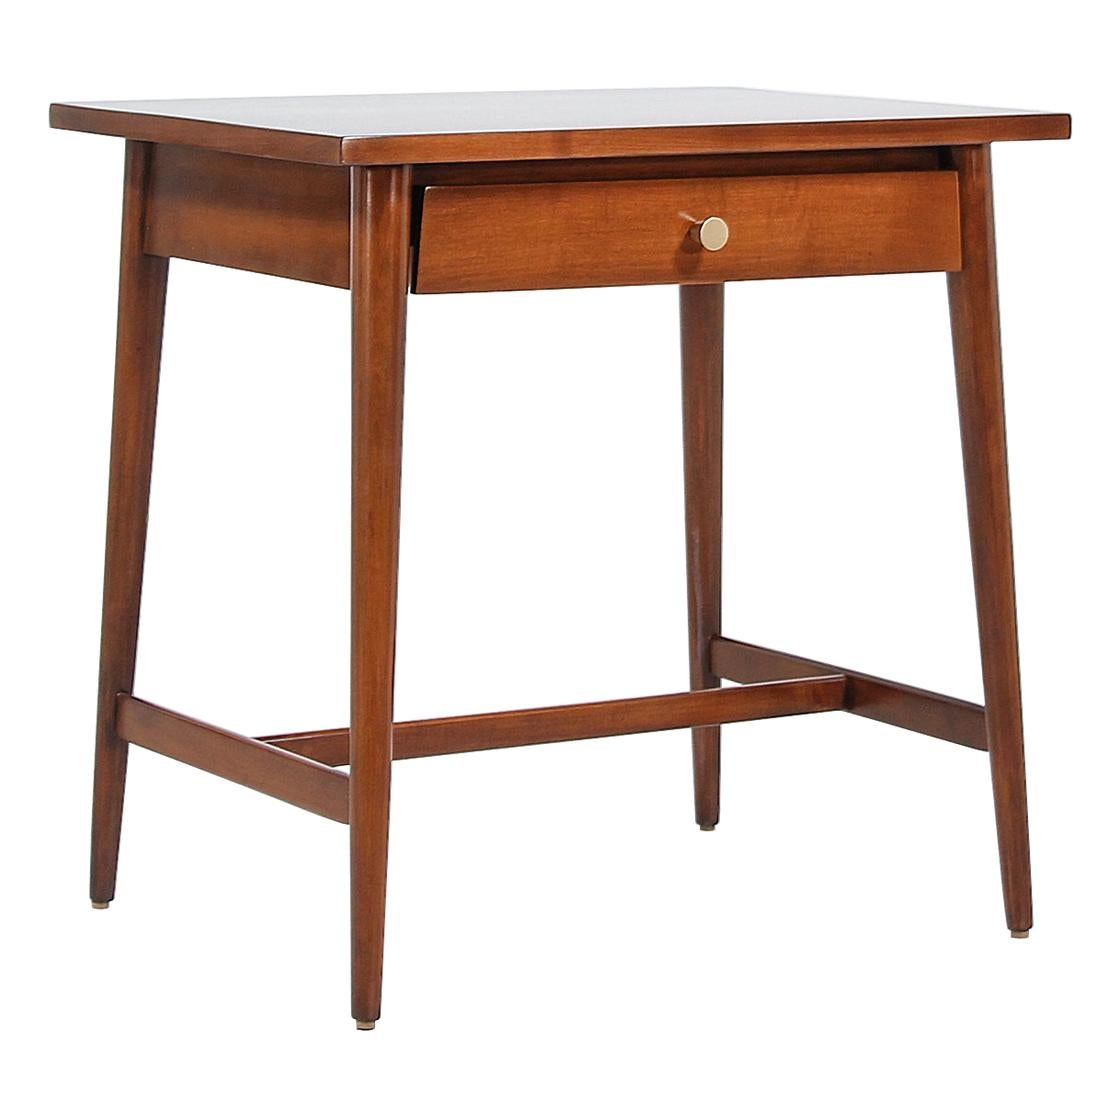 Paul McCobb "Planner Group" Nightstand for Winchendon Furniture